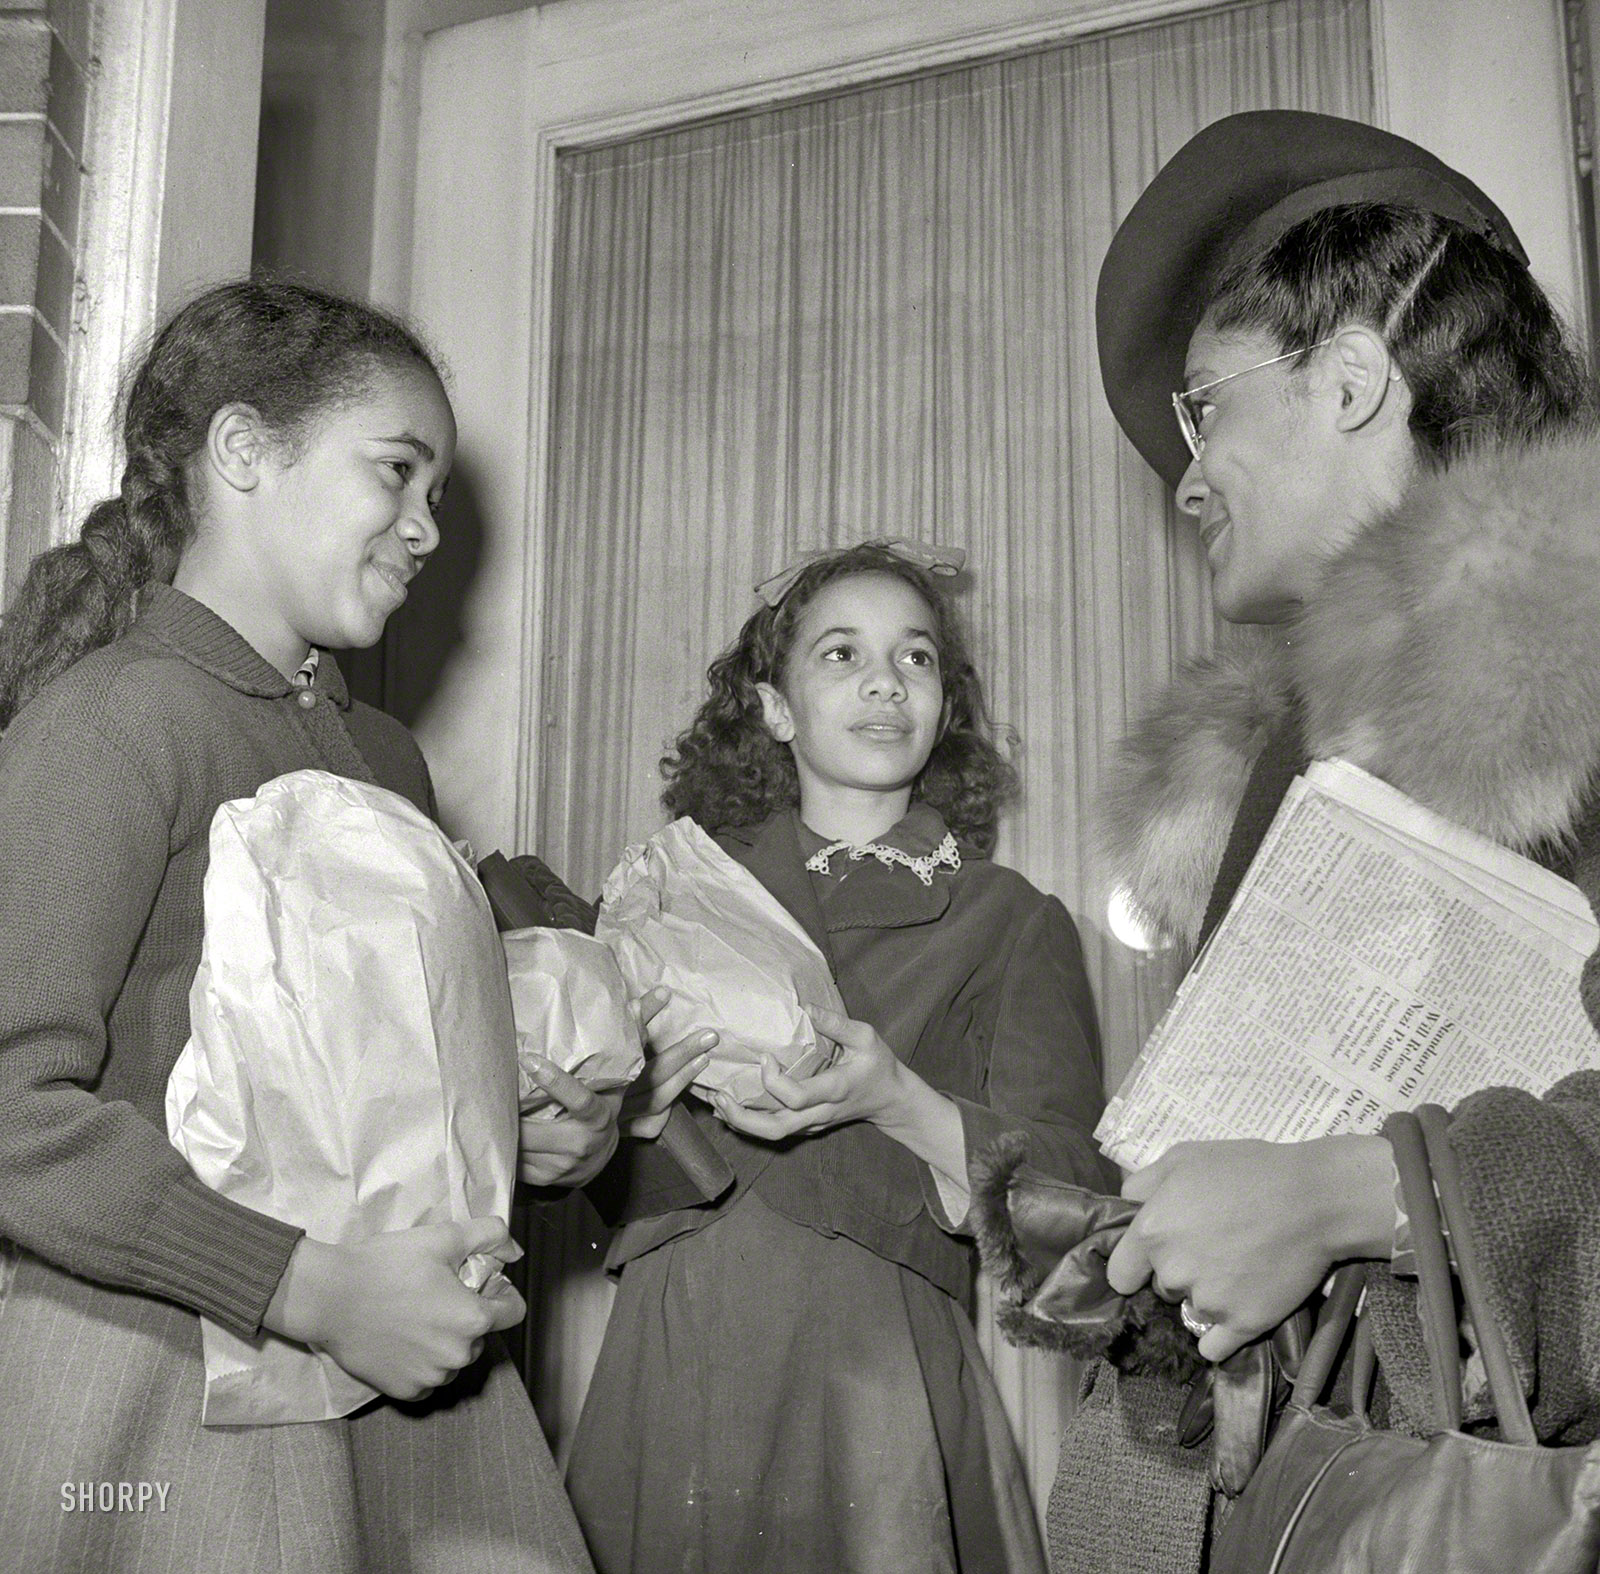 March 26, 1942. "Washington, D.C. Jewel Mazique, worker at the Library of Congress, coming home from work." Jewel, along with her doctor husband, are raising three of her nieces. Photo by John Collier for the OWI. View full size.